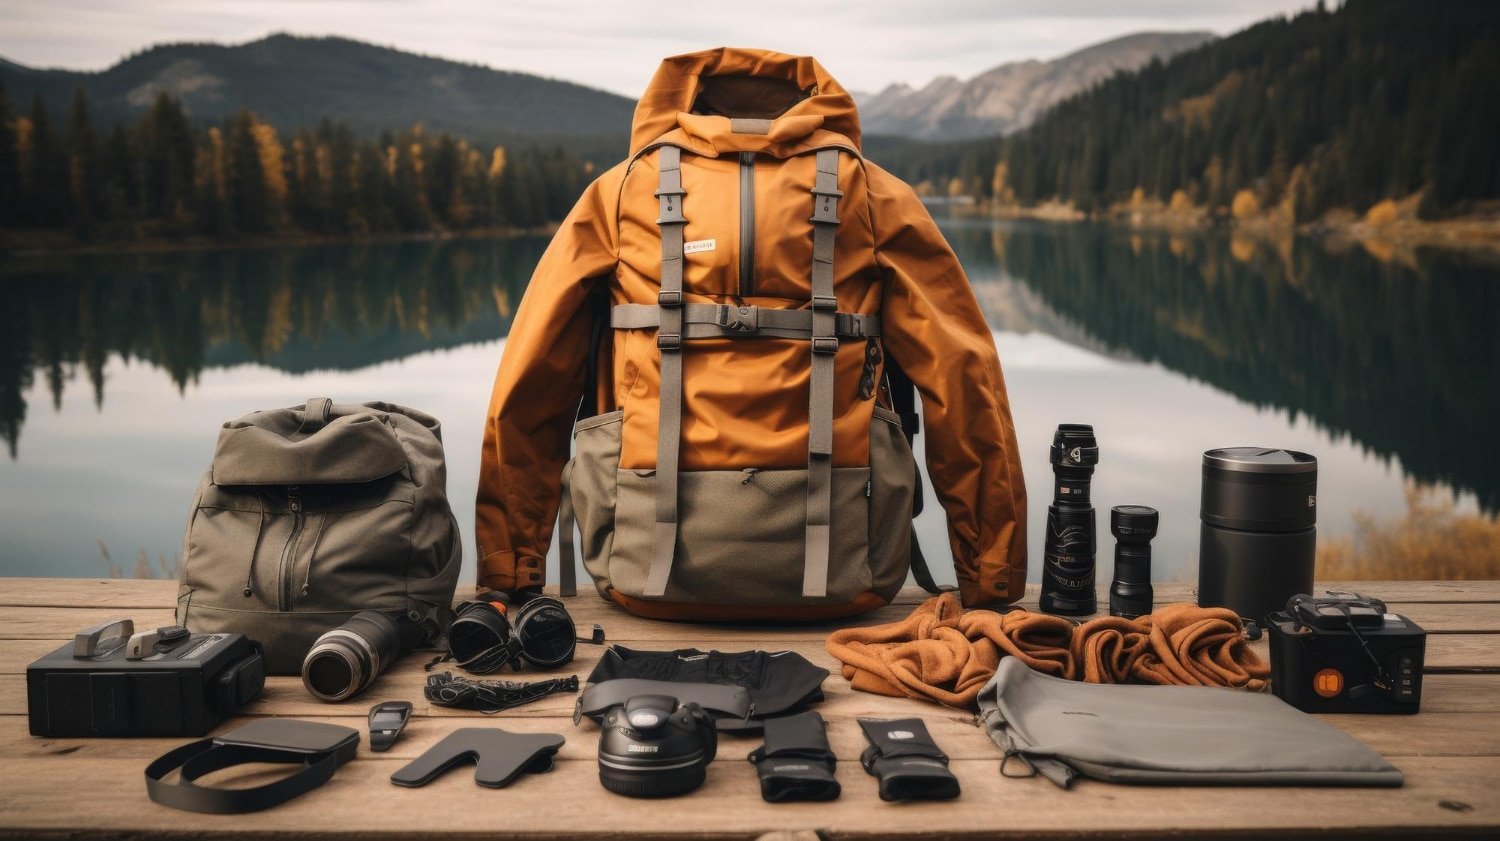 Explore Outdoor Adventures With Regatta’s High-Quality Outdoor Clothing And Gear